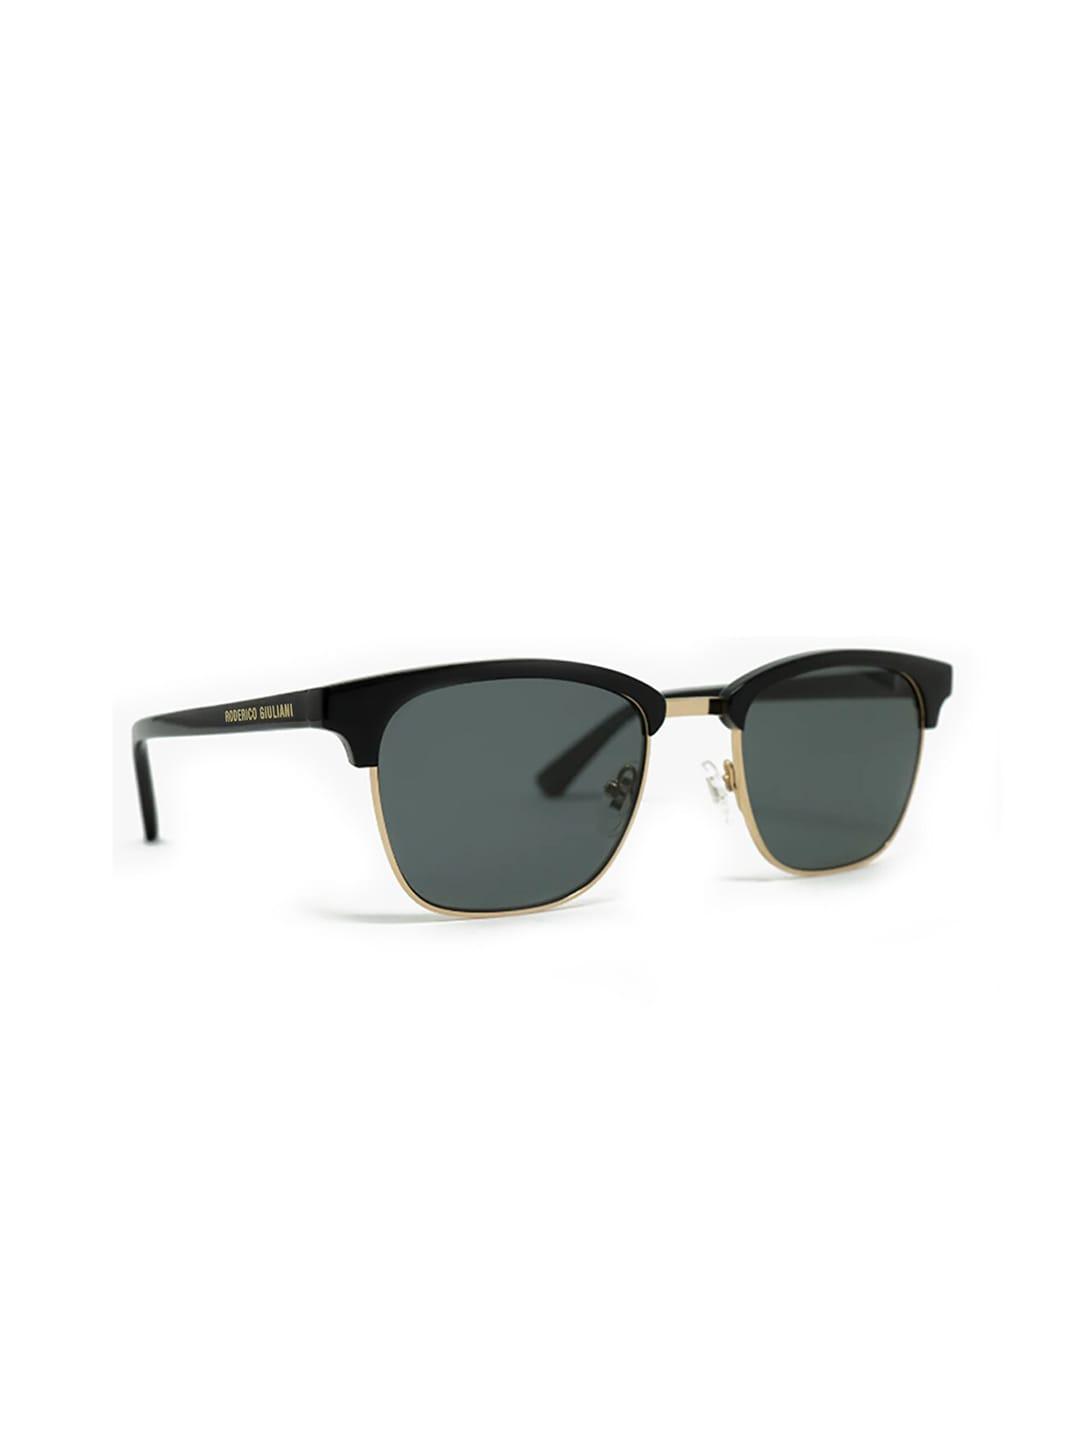 roderico giuliani square sunglasses with polarised and uv protected lens